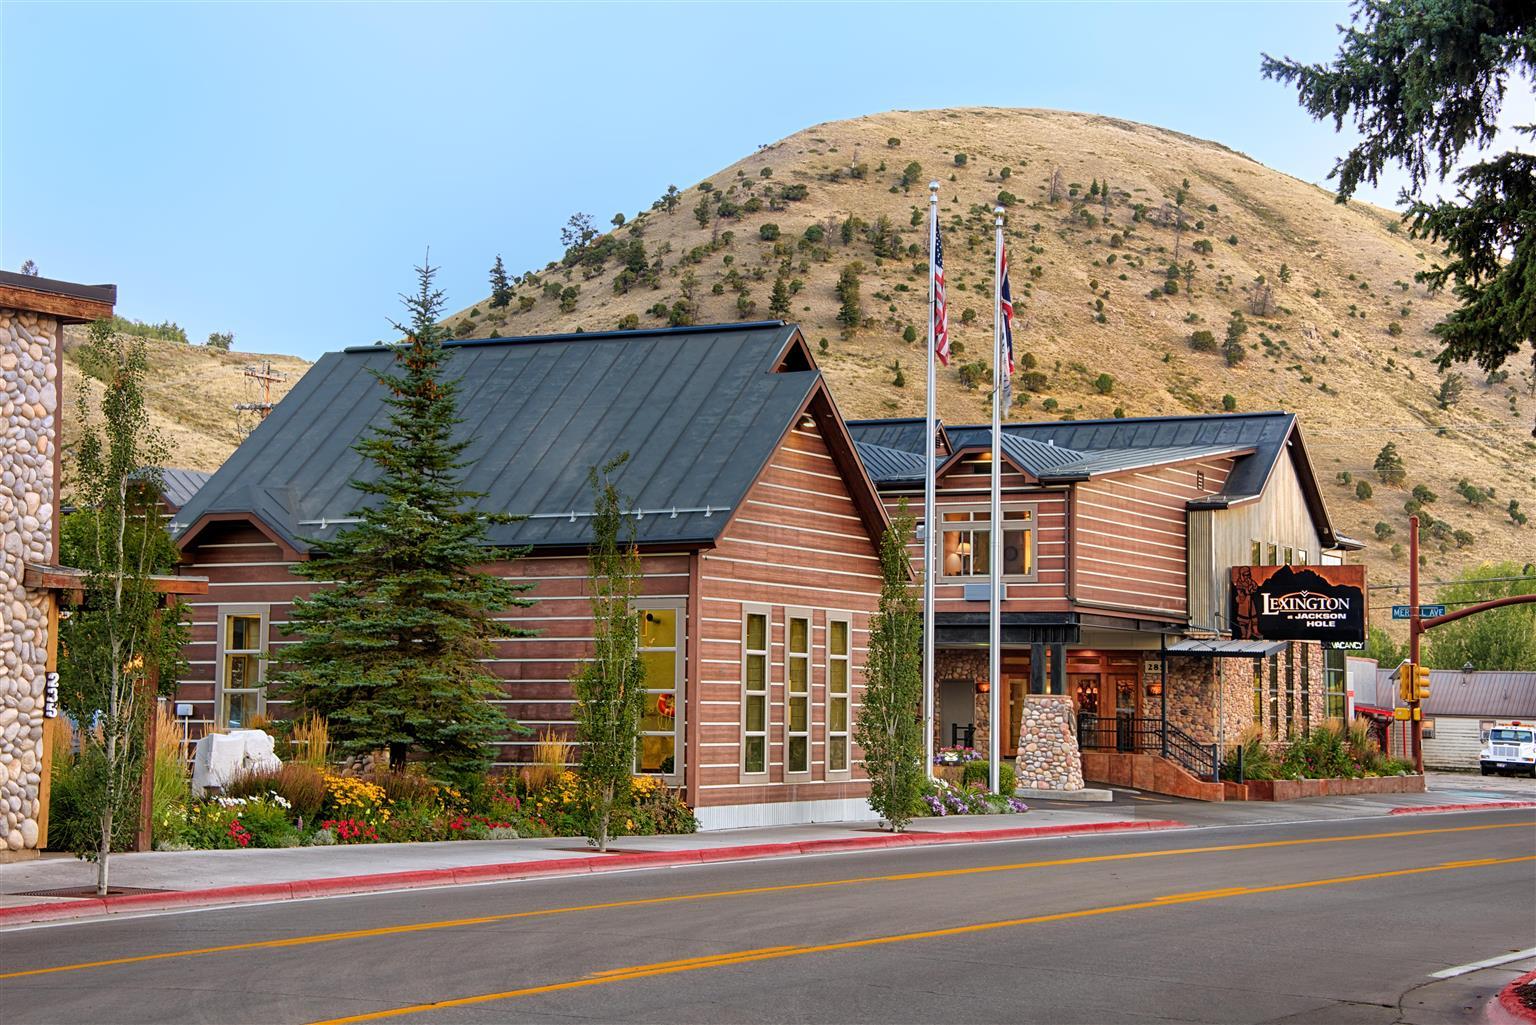 The Rockwell Inn (formerly the Lexington at Jackson Hole Hotel & Suites) image